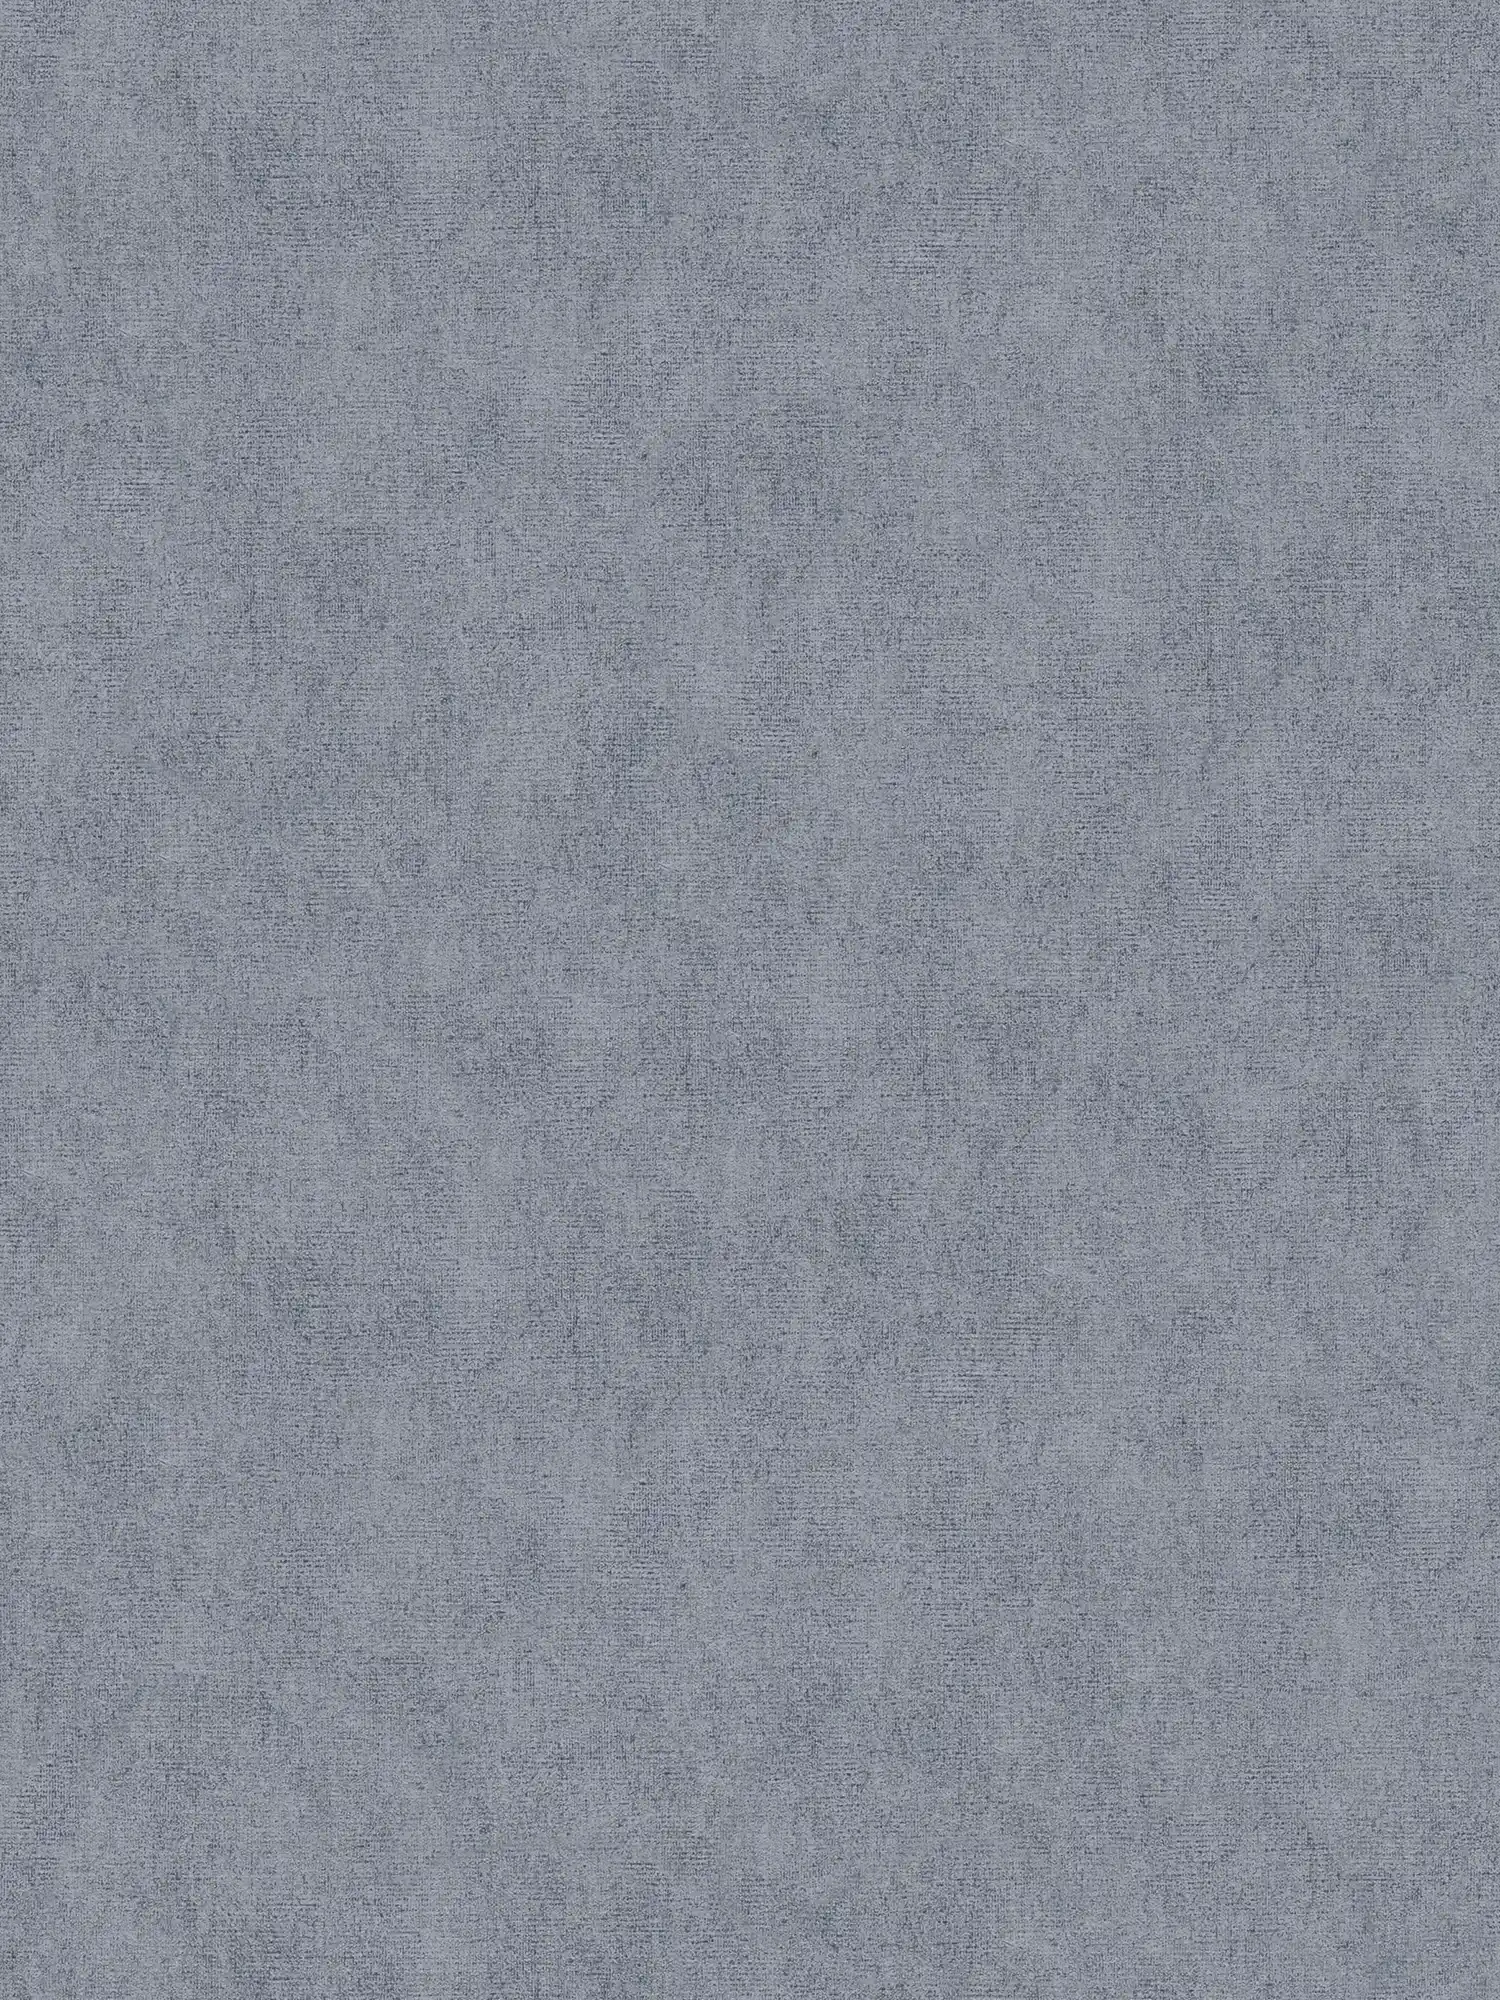 Dove blue plain wallpaper with hatching & shimmer effect - Blue
